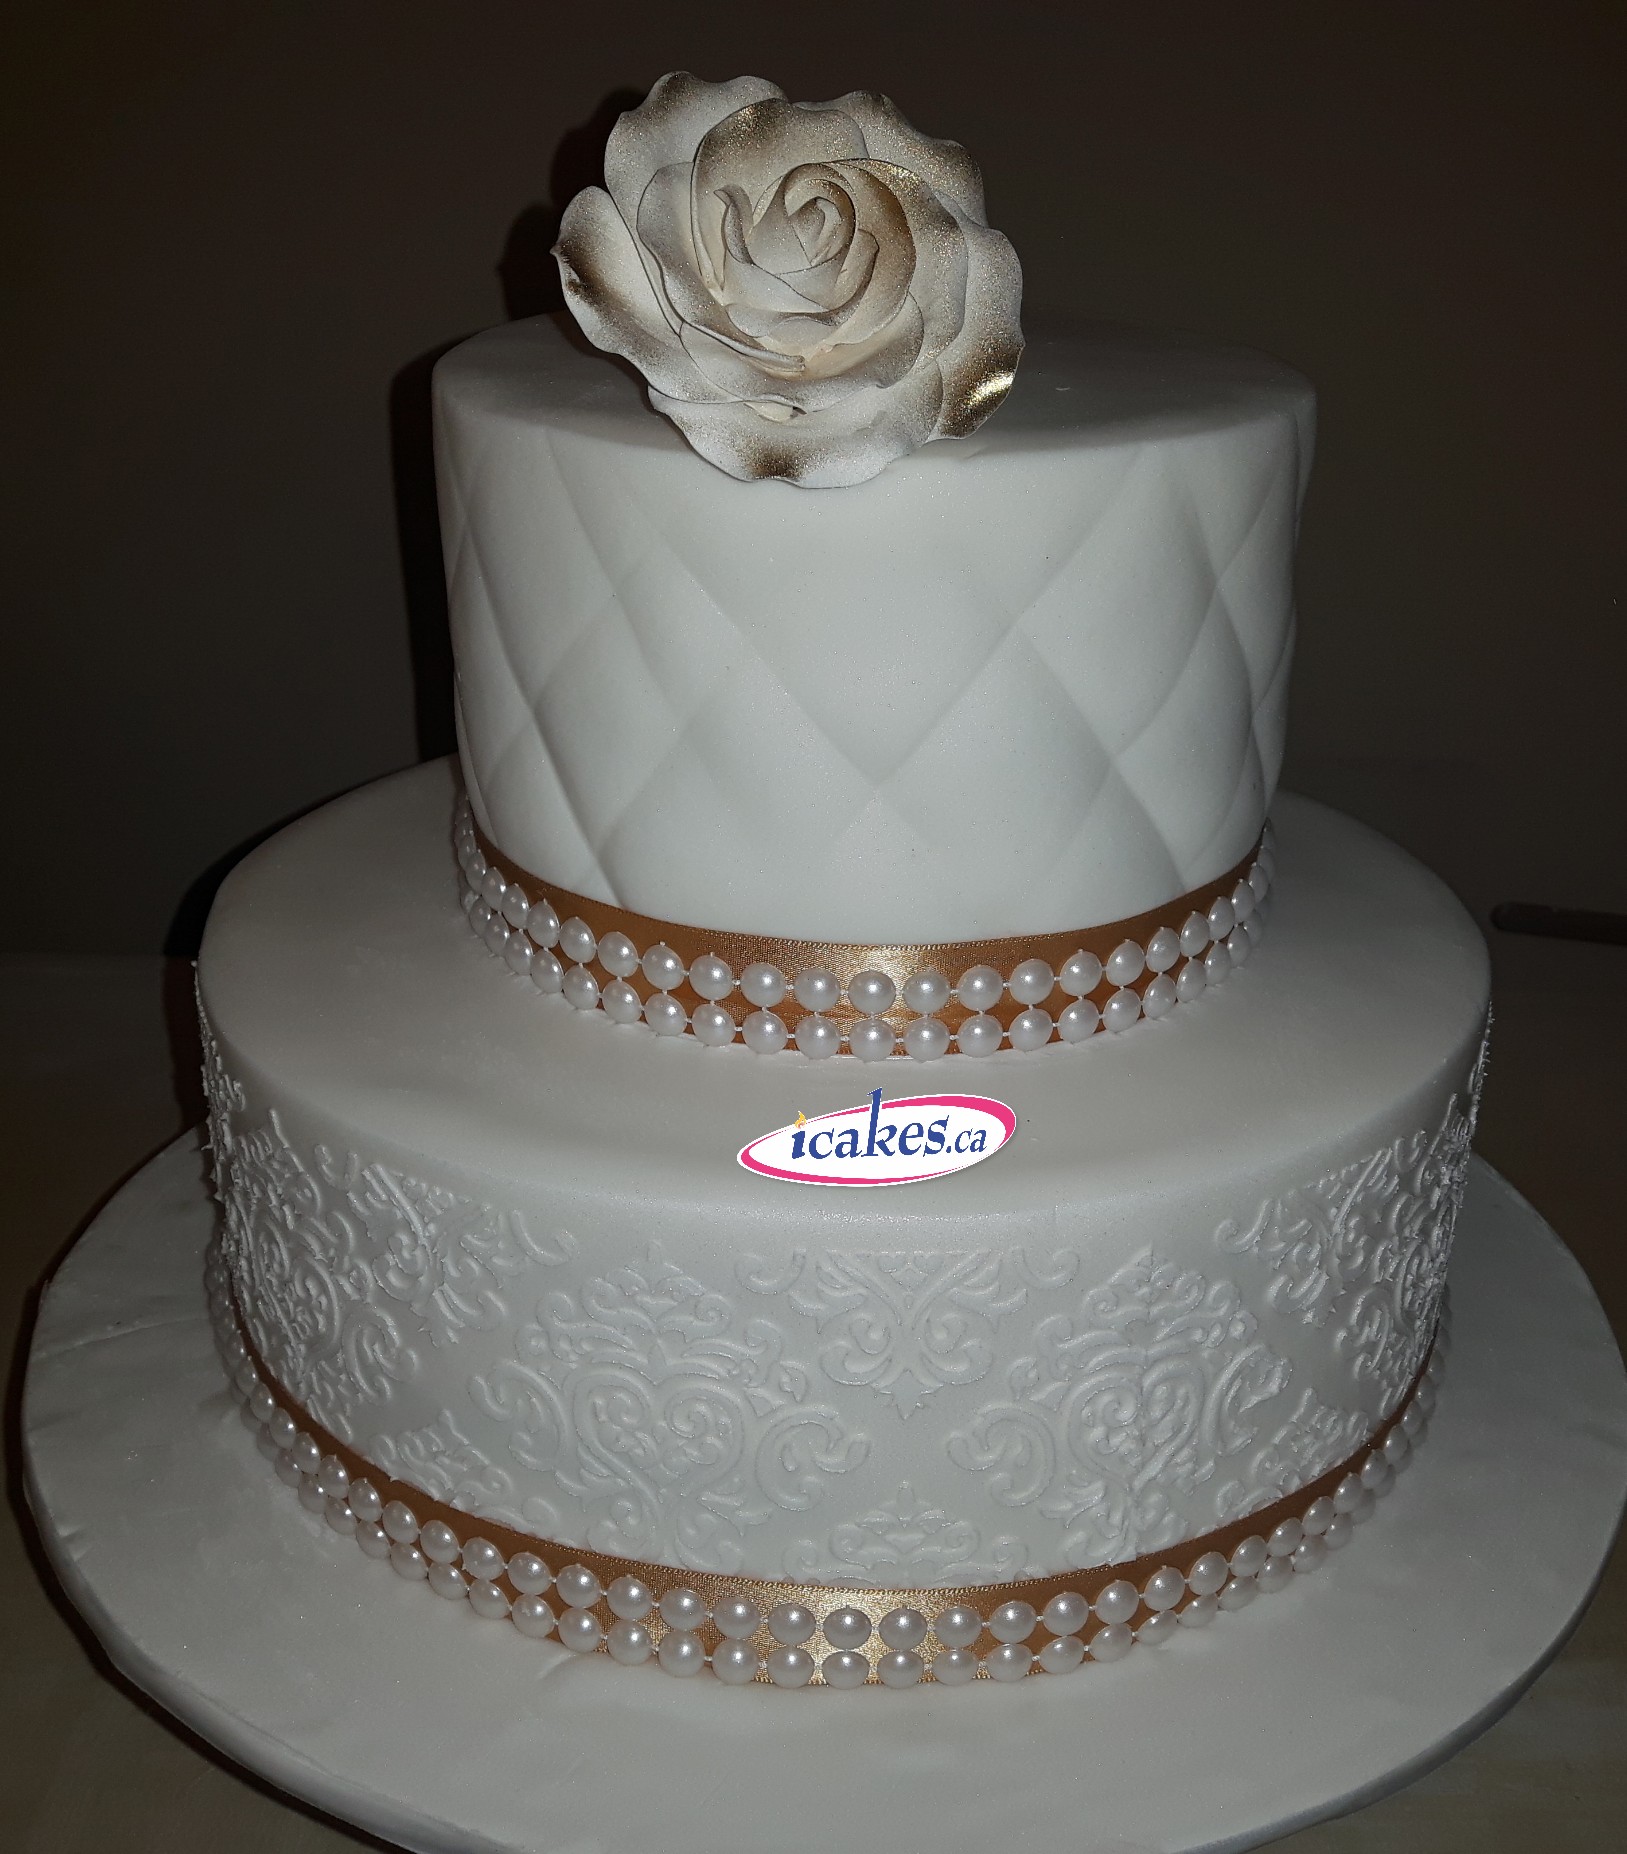 Sweet Heart, Exclusive Stencil, Gum Paste Roses, 2 Tier Cake For Woman